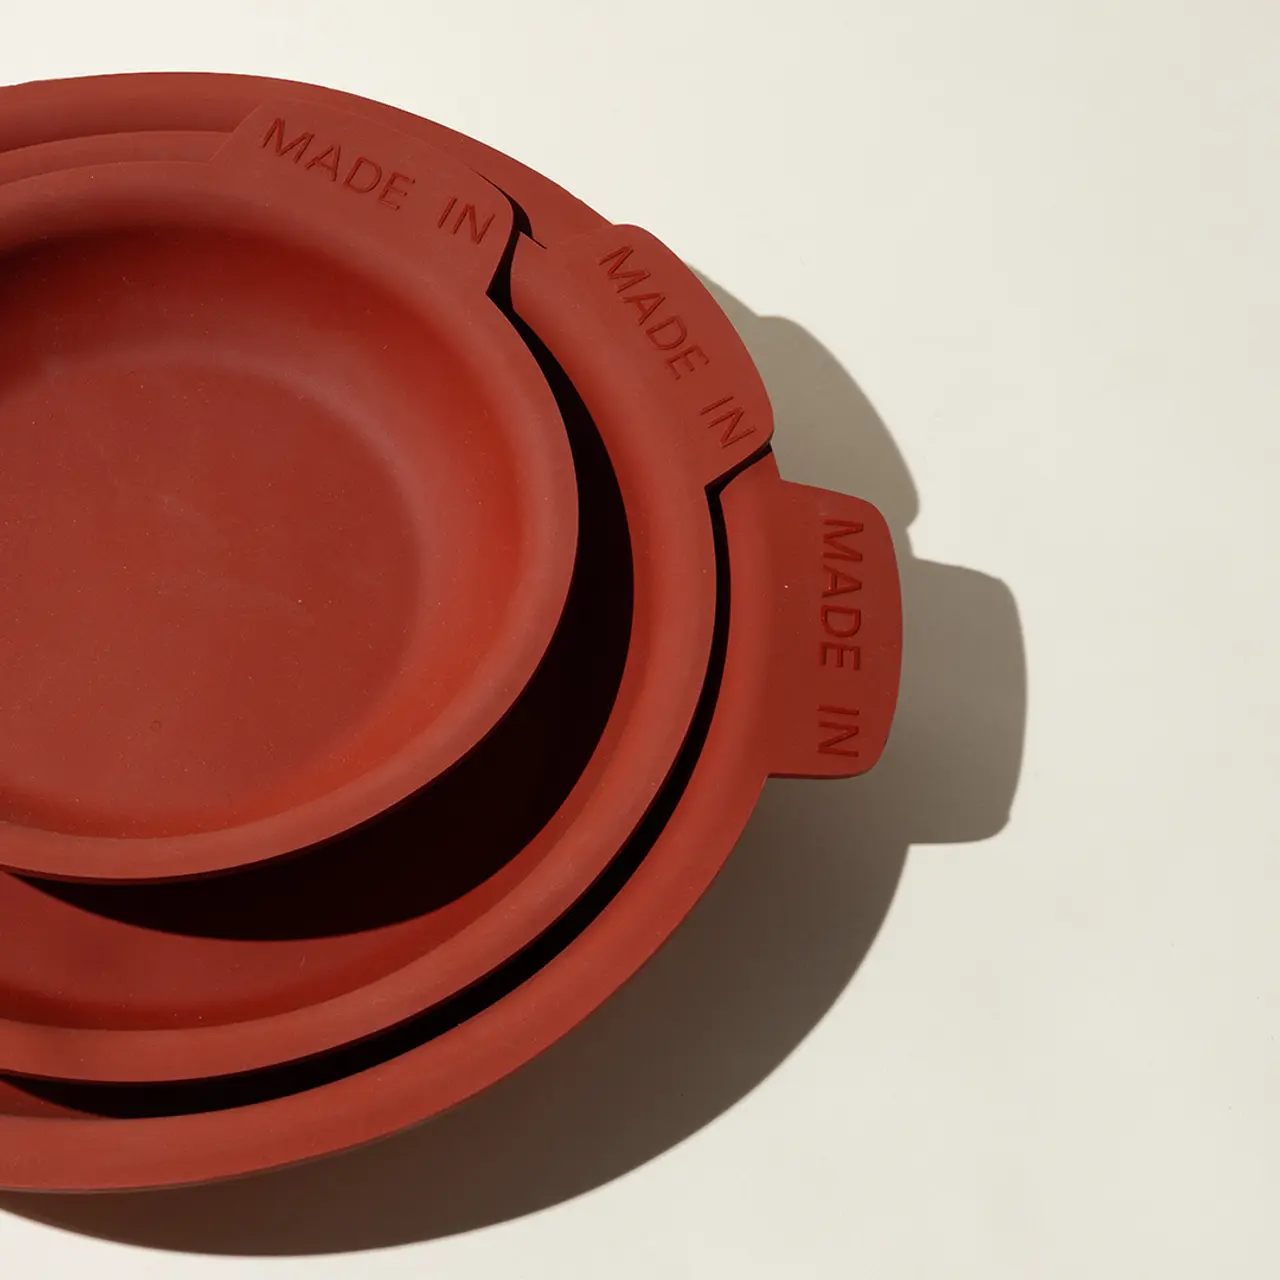 A stack of red ceramic plates of varying sizes with "MADE IN" embossed on their rims, casting shadows on a light surface.